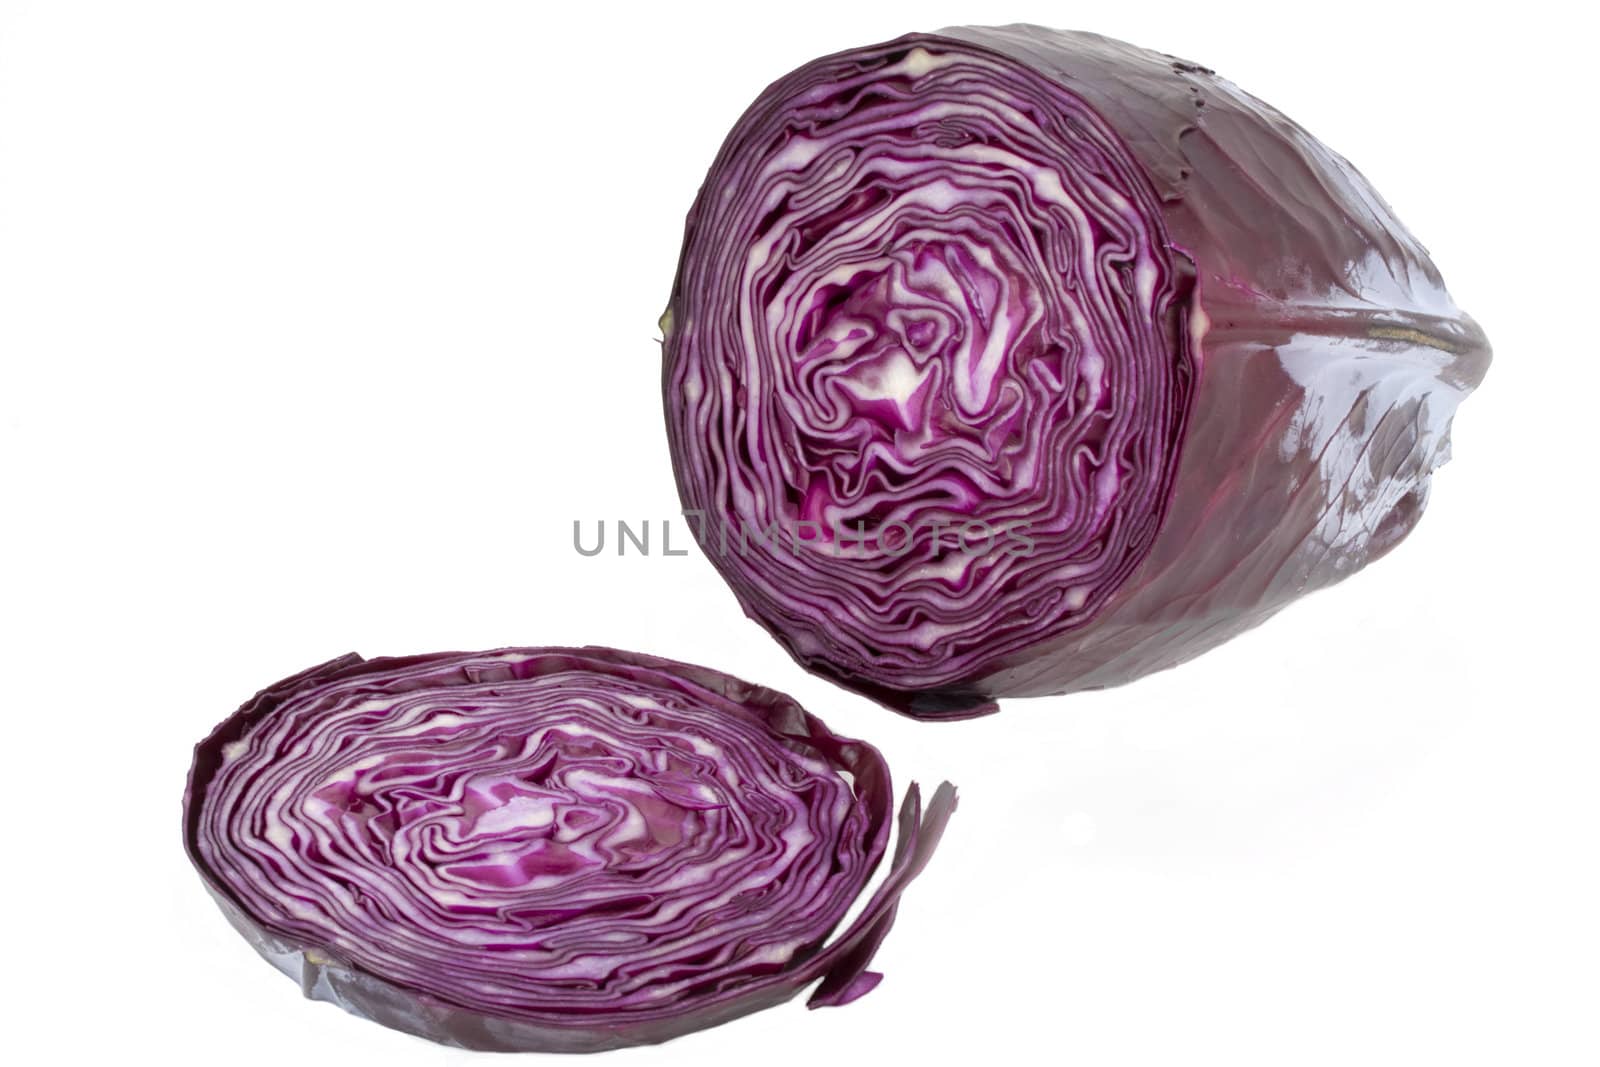 sliced red cabbage on white background by bernjuer